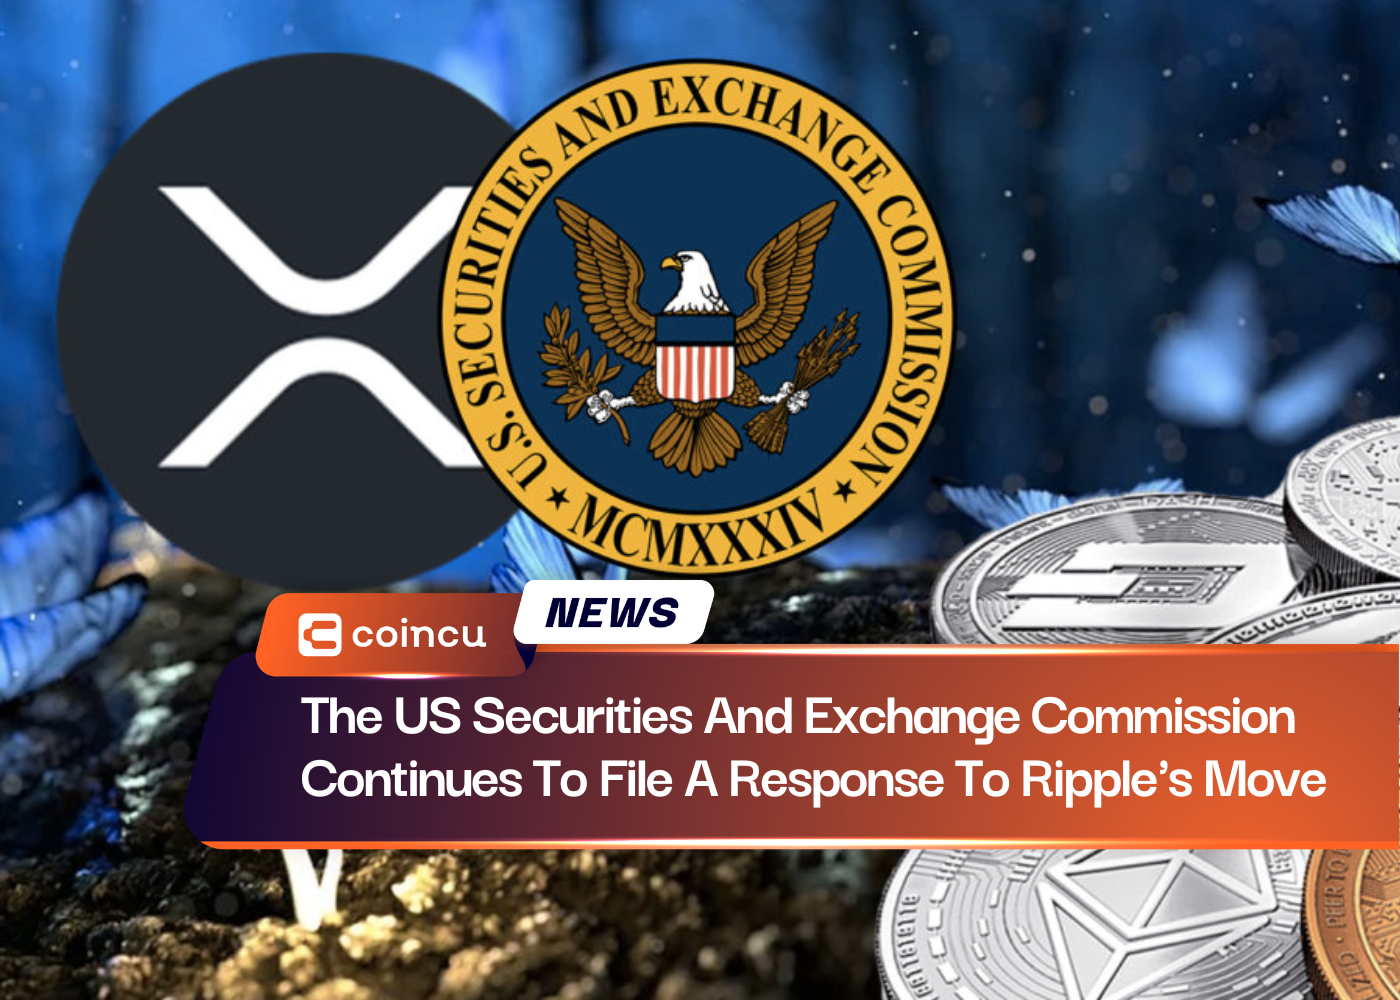 The US Securities And Exchange Commission Continues To File A Response To Ripple's Move